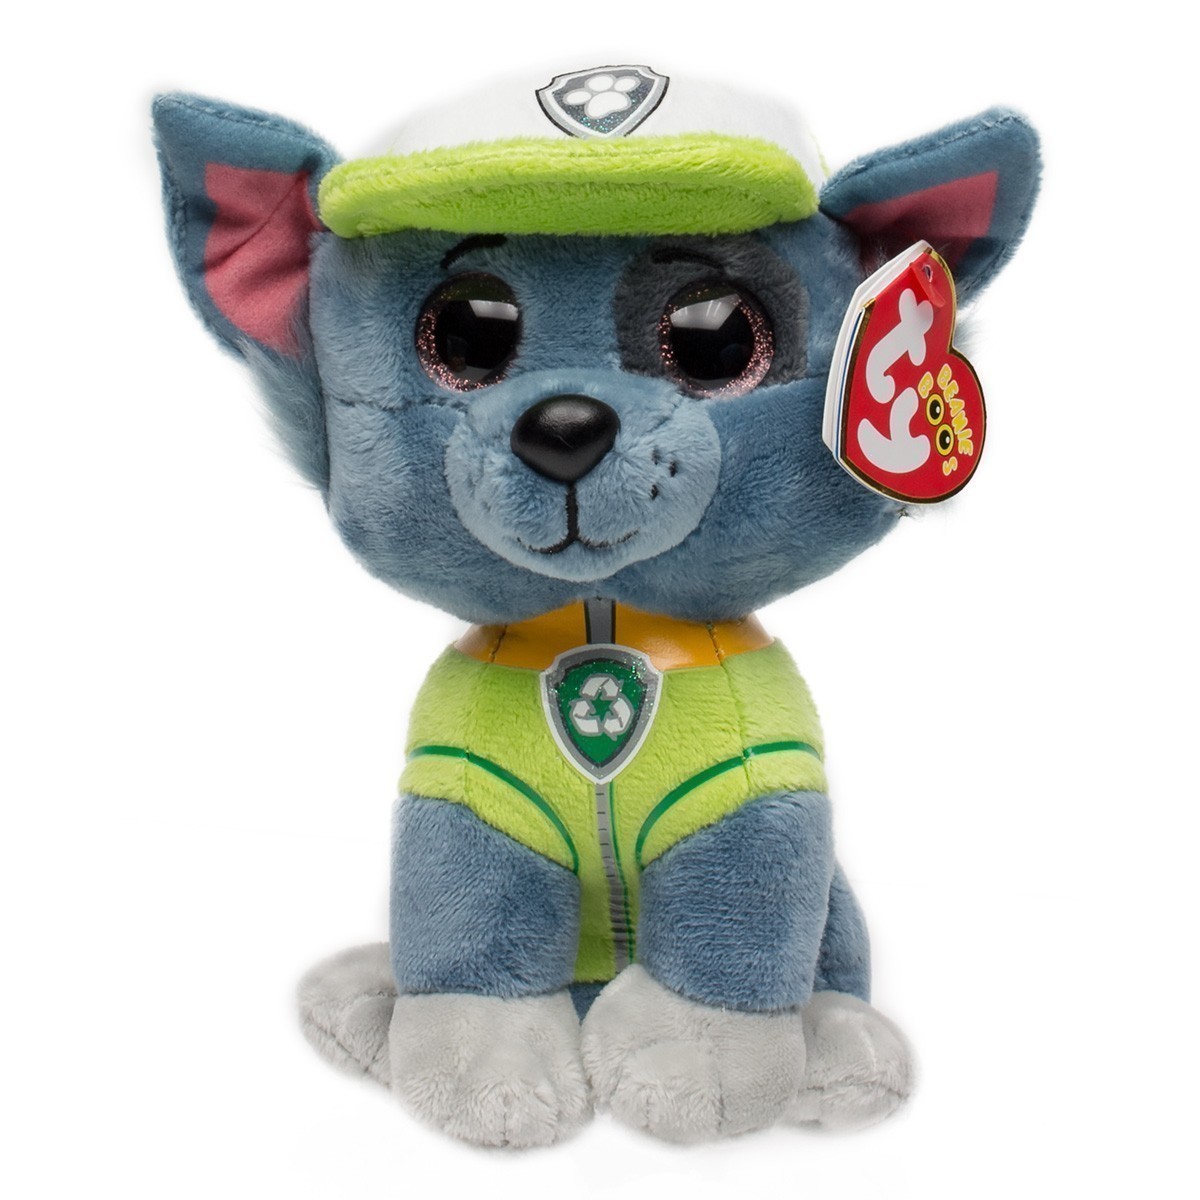 Nickelodeon - Paw Patrol Beanie Boo Collection - Rocky